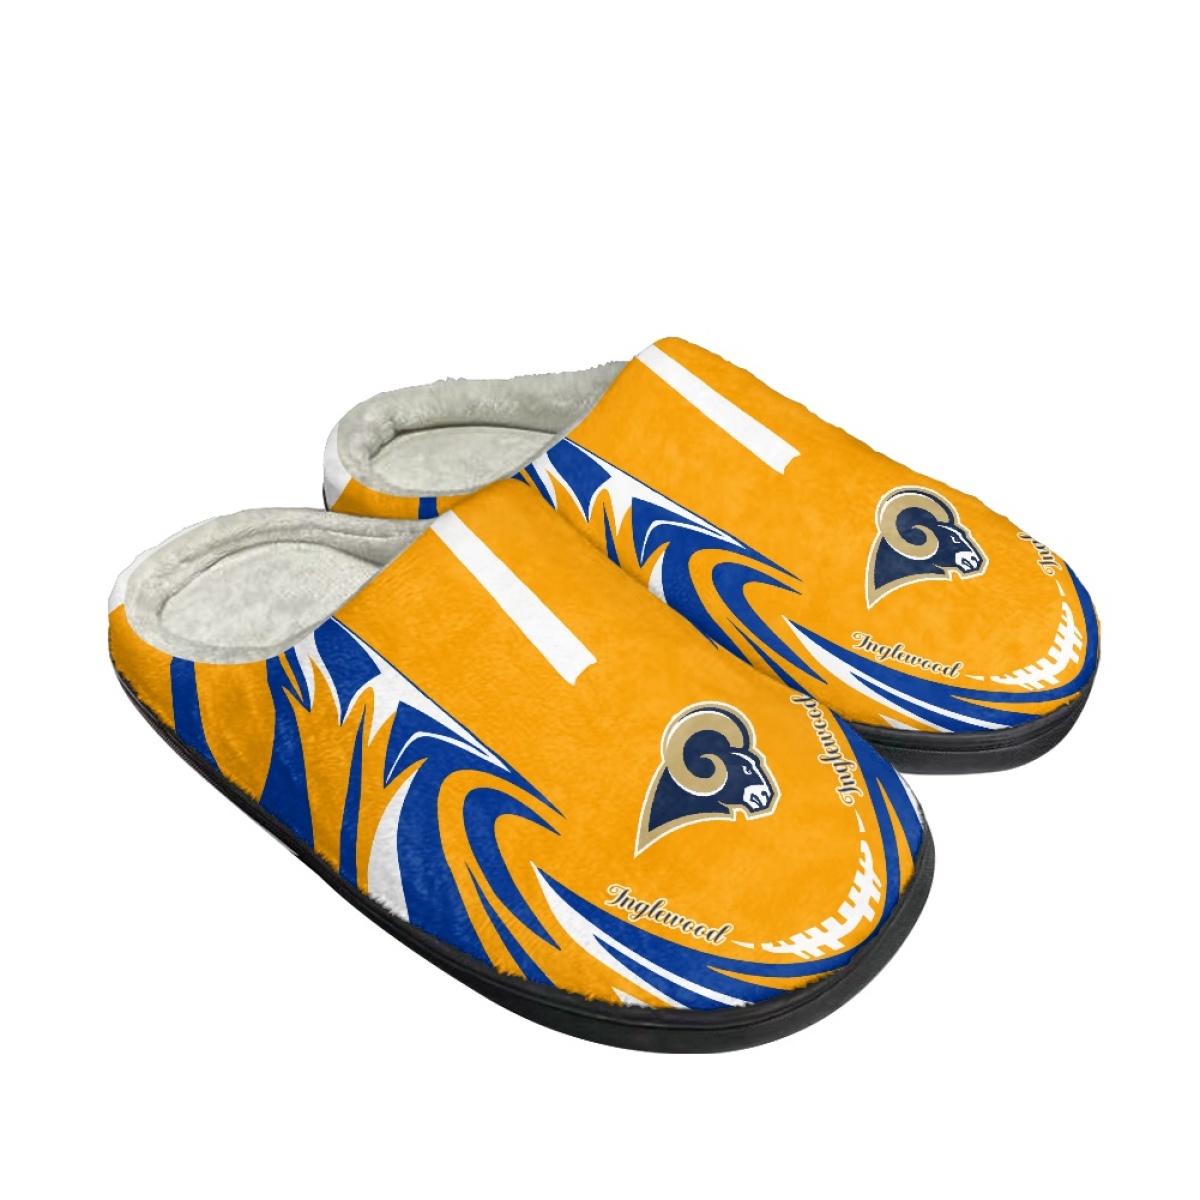 Men's Los Angeles Rams Slippers/Shoes 004